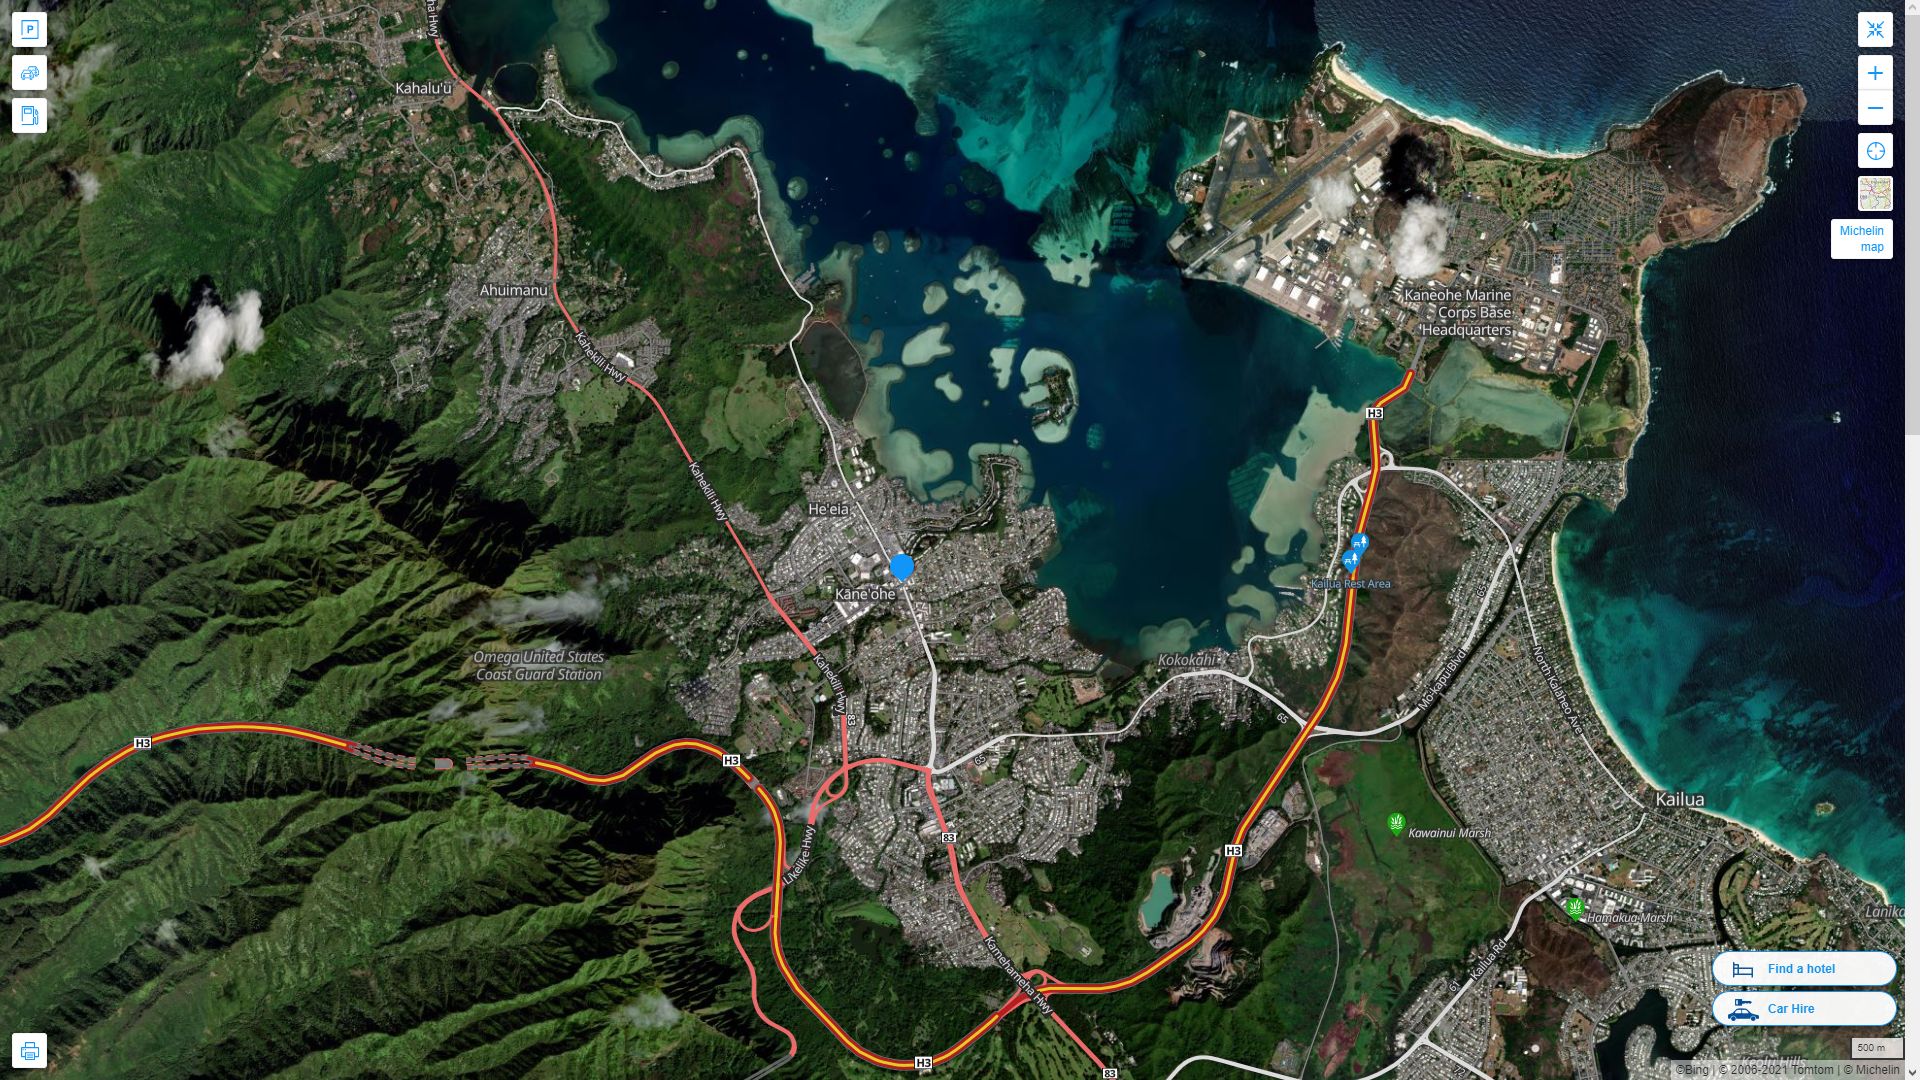 Kaneohe Hawaii Highway and Road Map with Satellite View